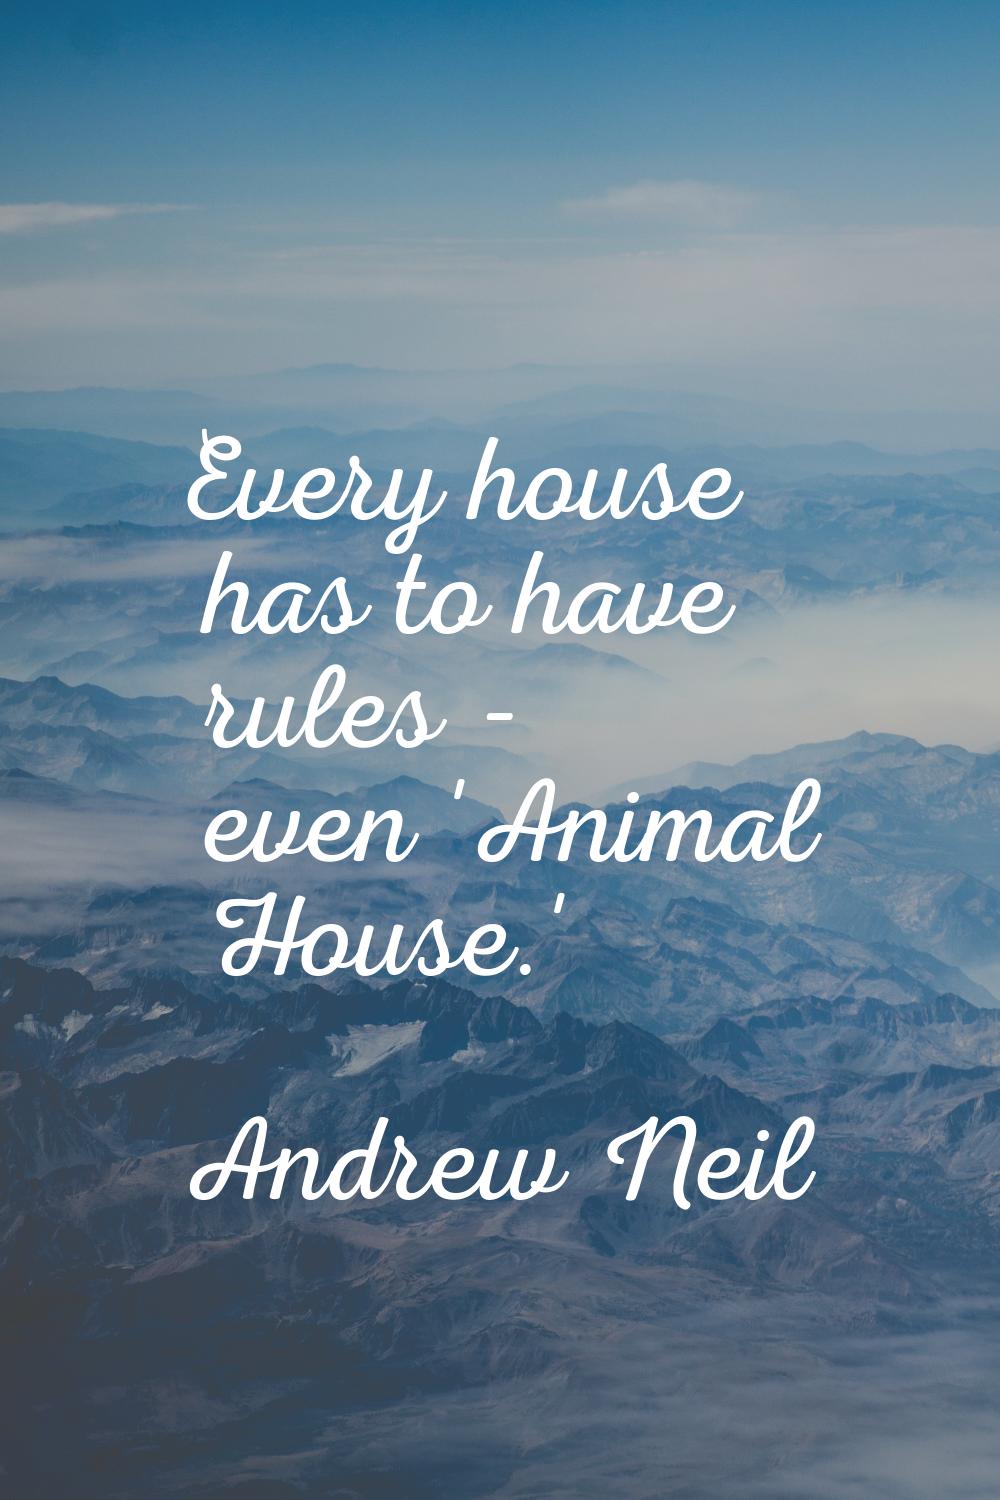 Every house has to have rules - even 'Animal House.'